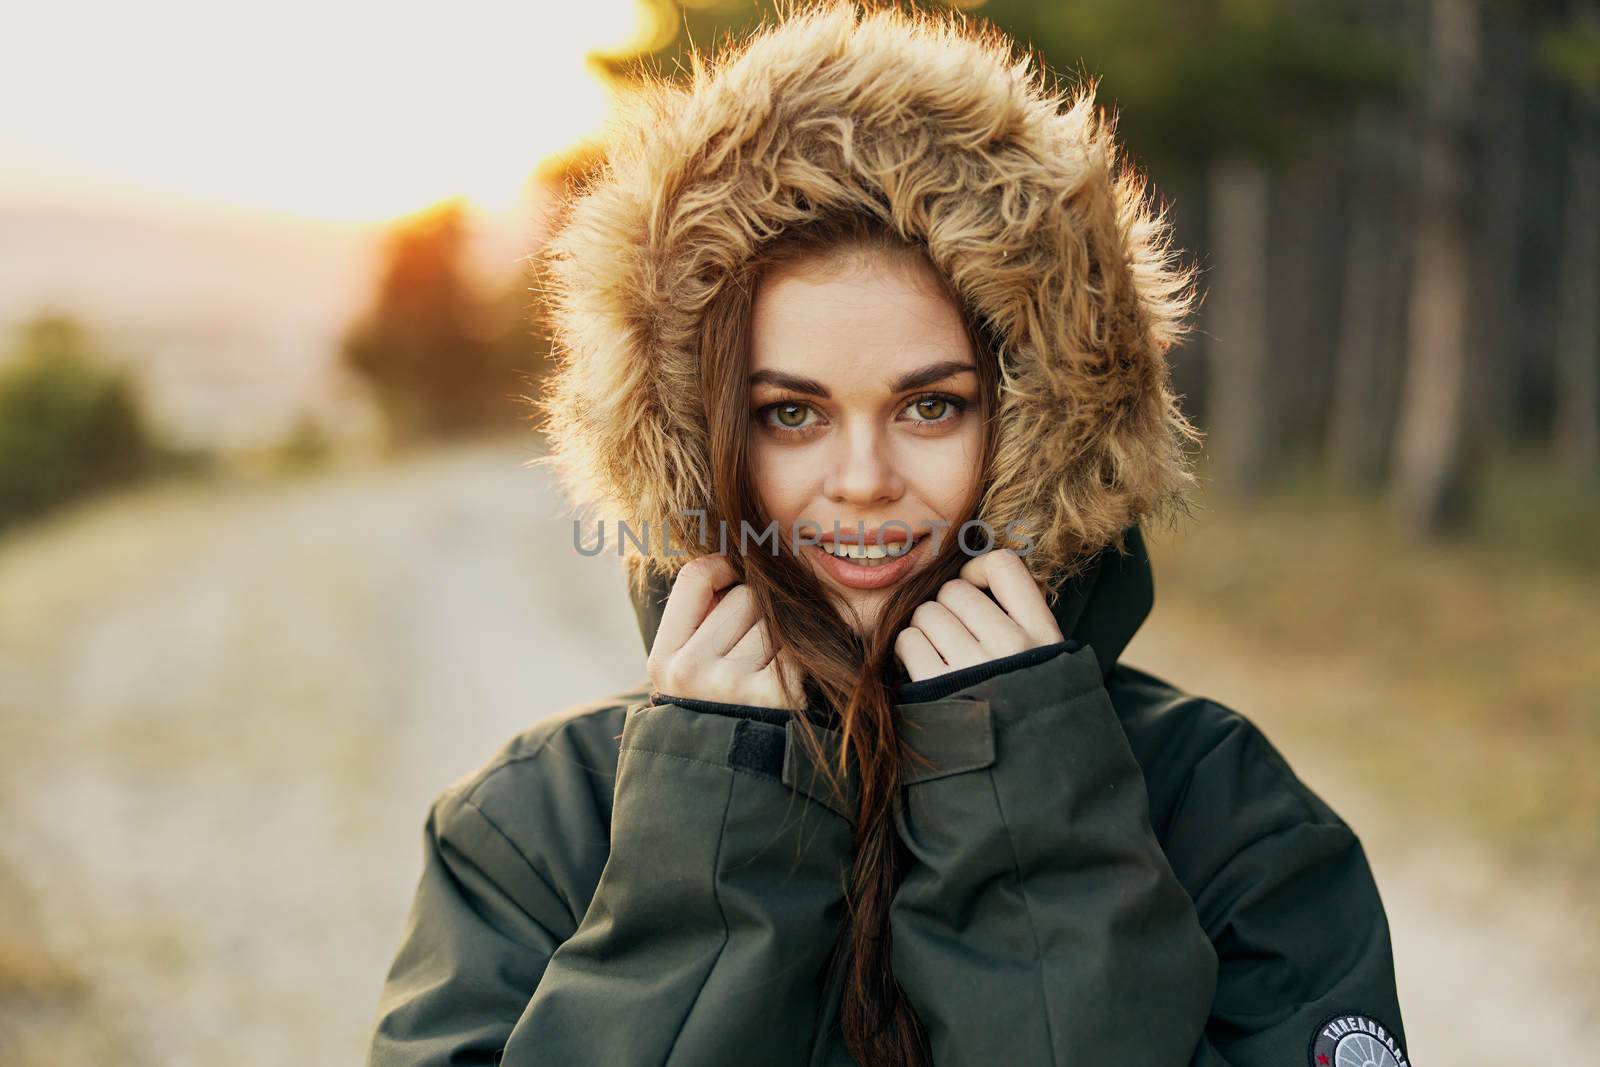 Woman warm jacket with a hood outdoors fresh air Freedom lifestyle. High quality photo